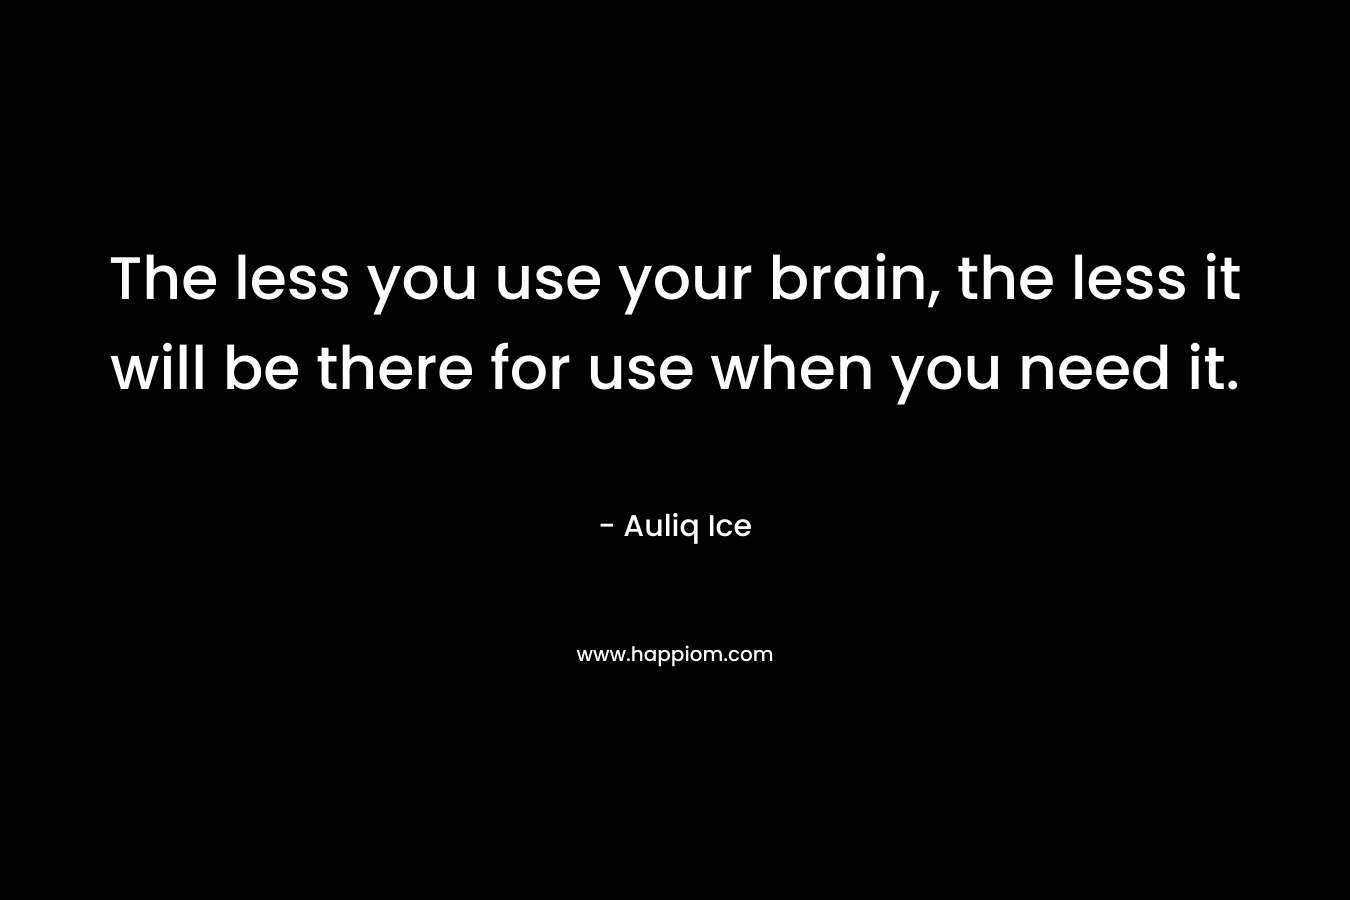 The less you use your brain, the less it will be there for use when you need it.